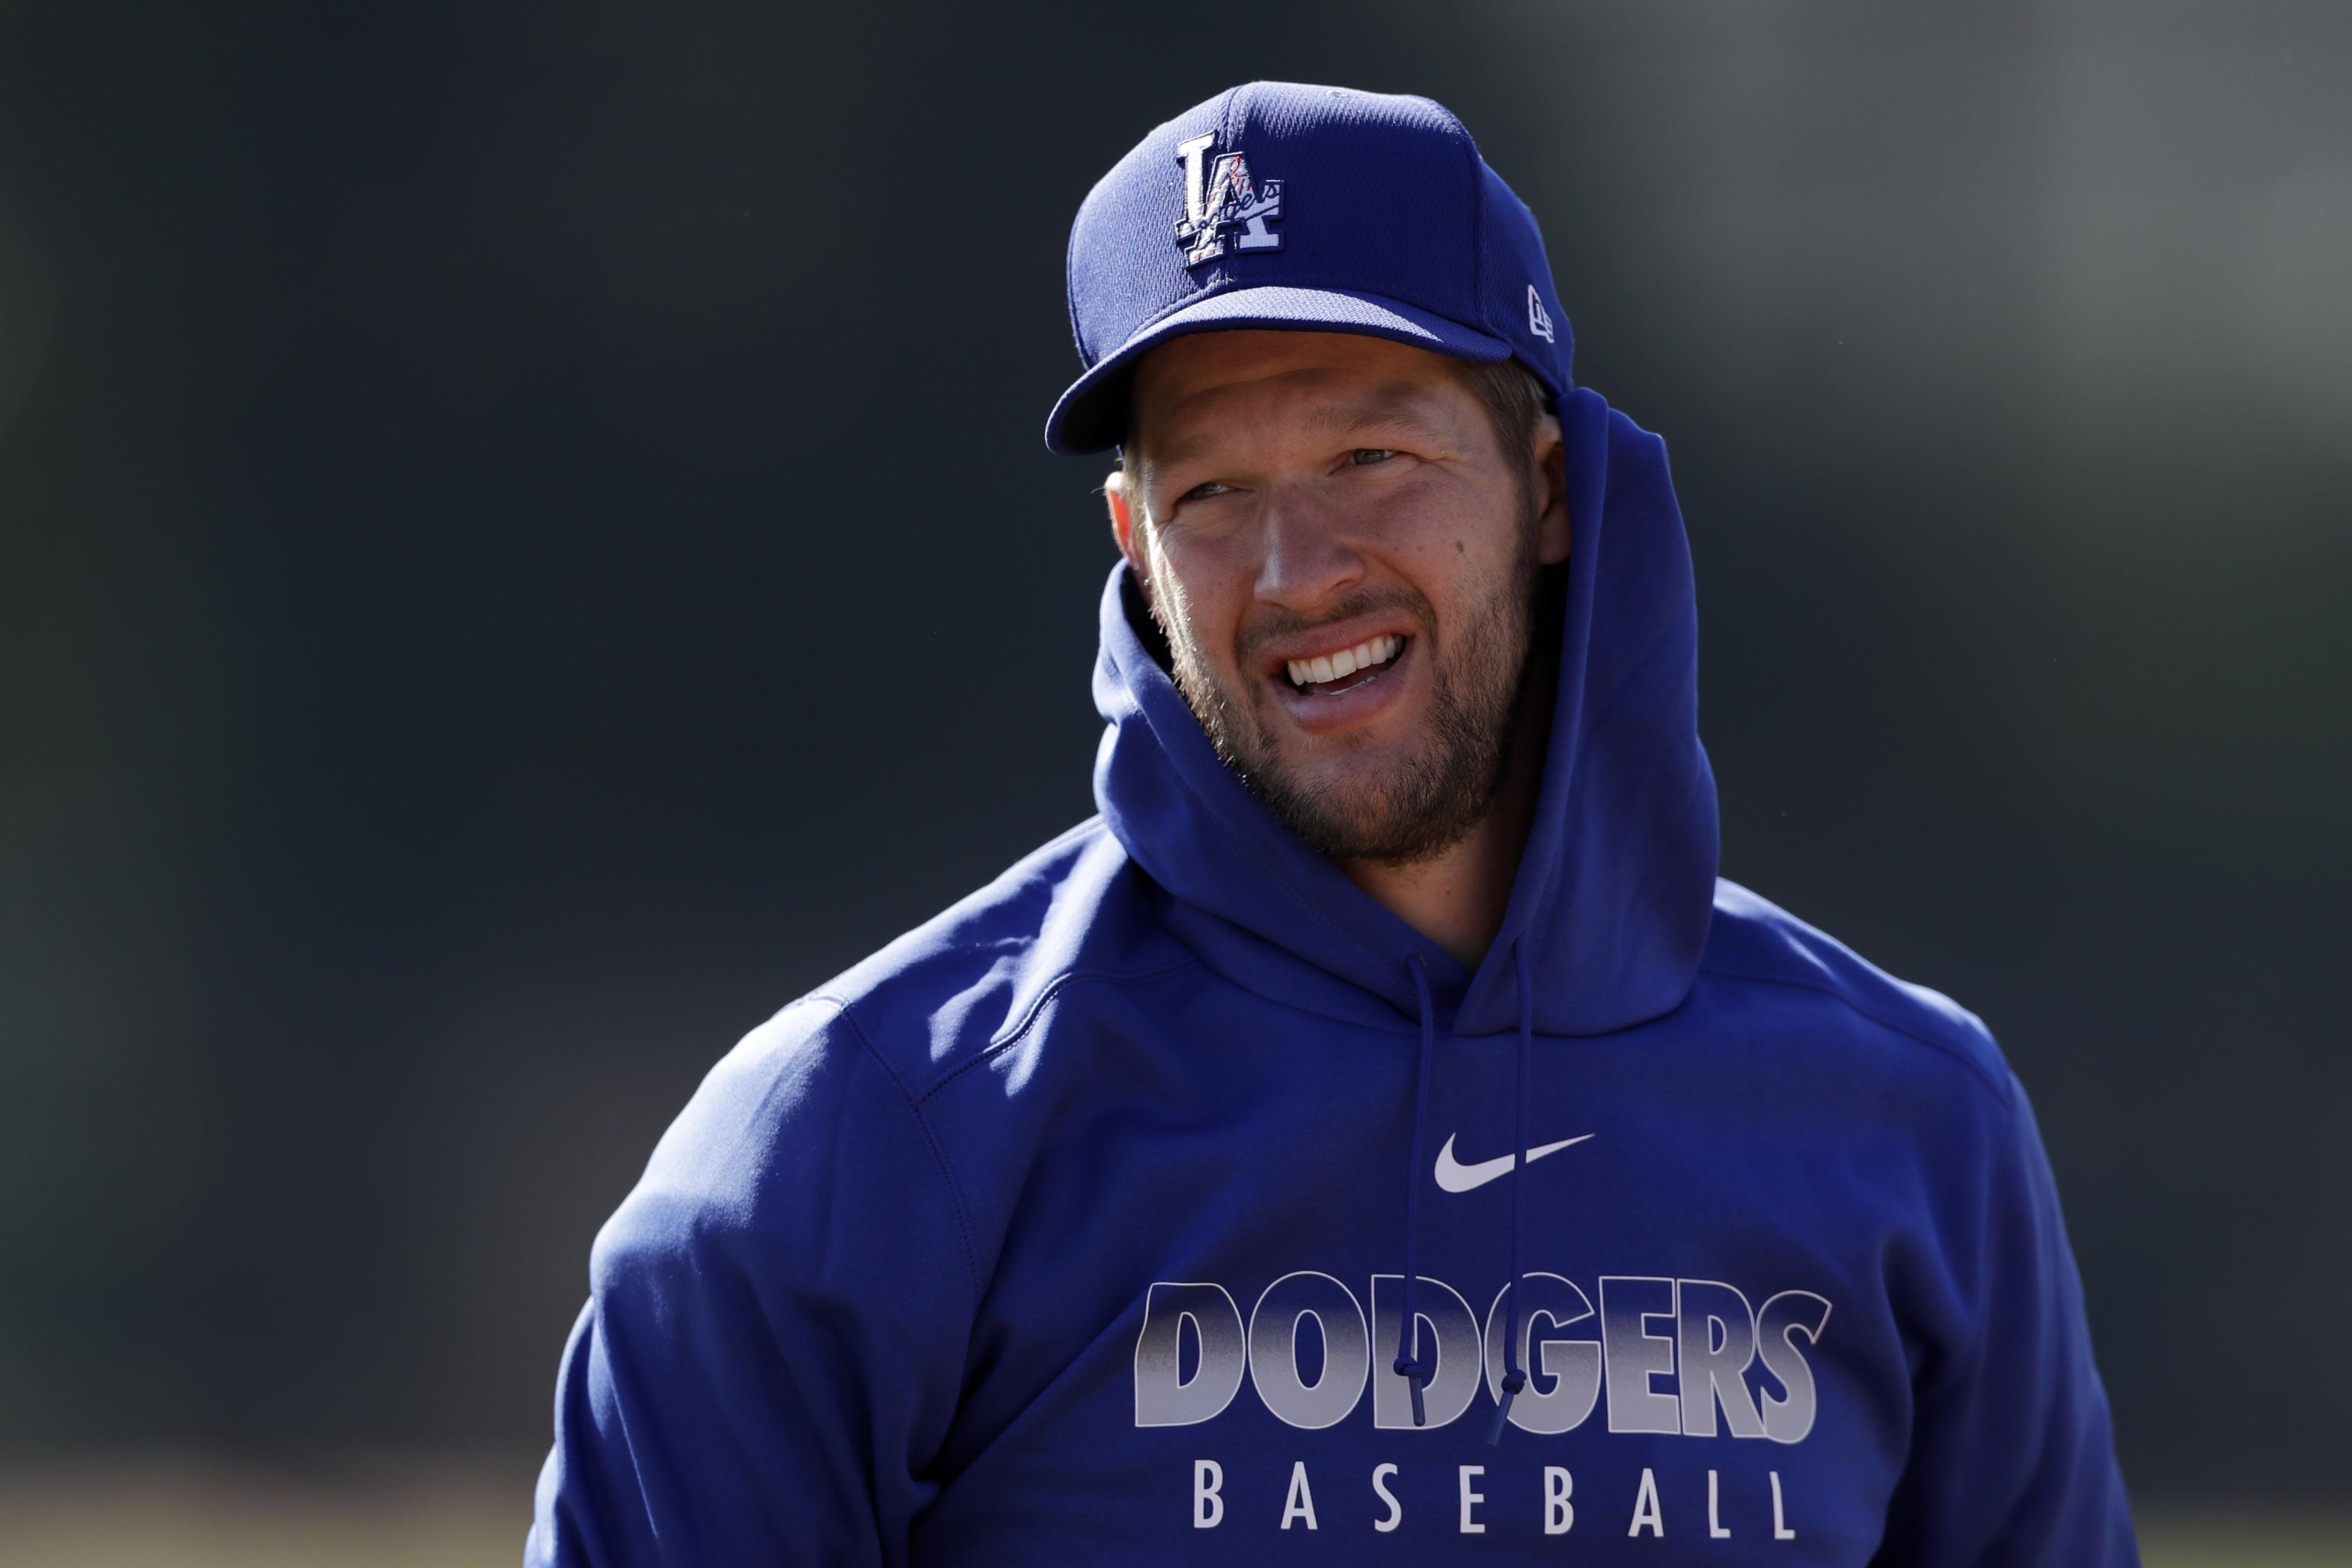 Clayton Kershaw is making a stirring last stand with Dodgers - Los